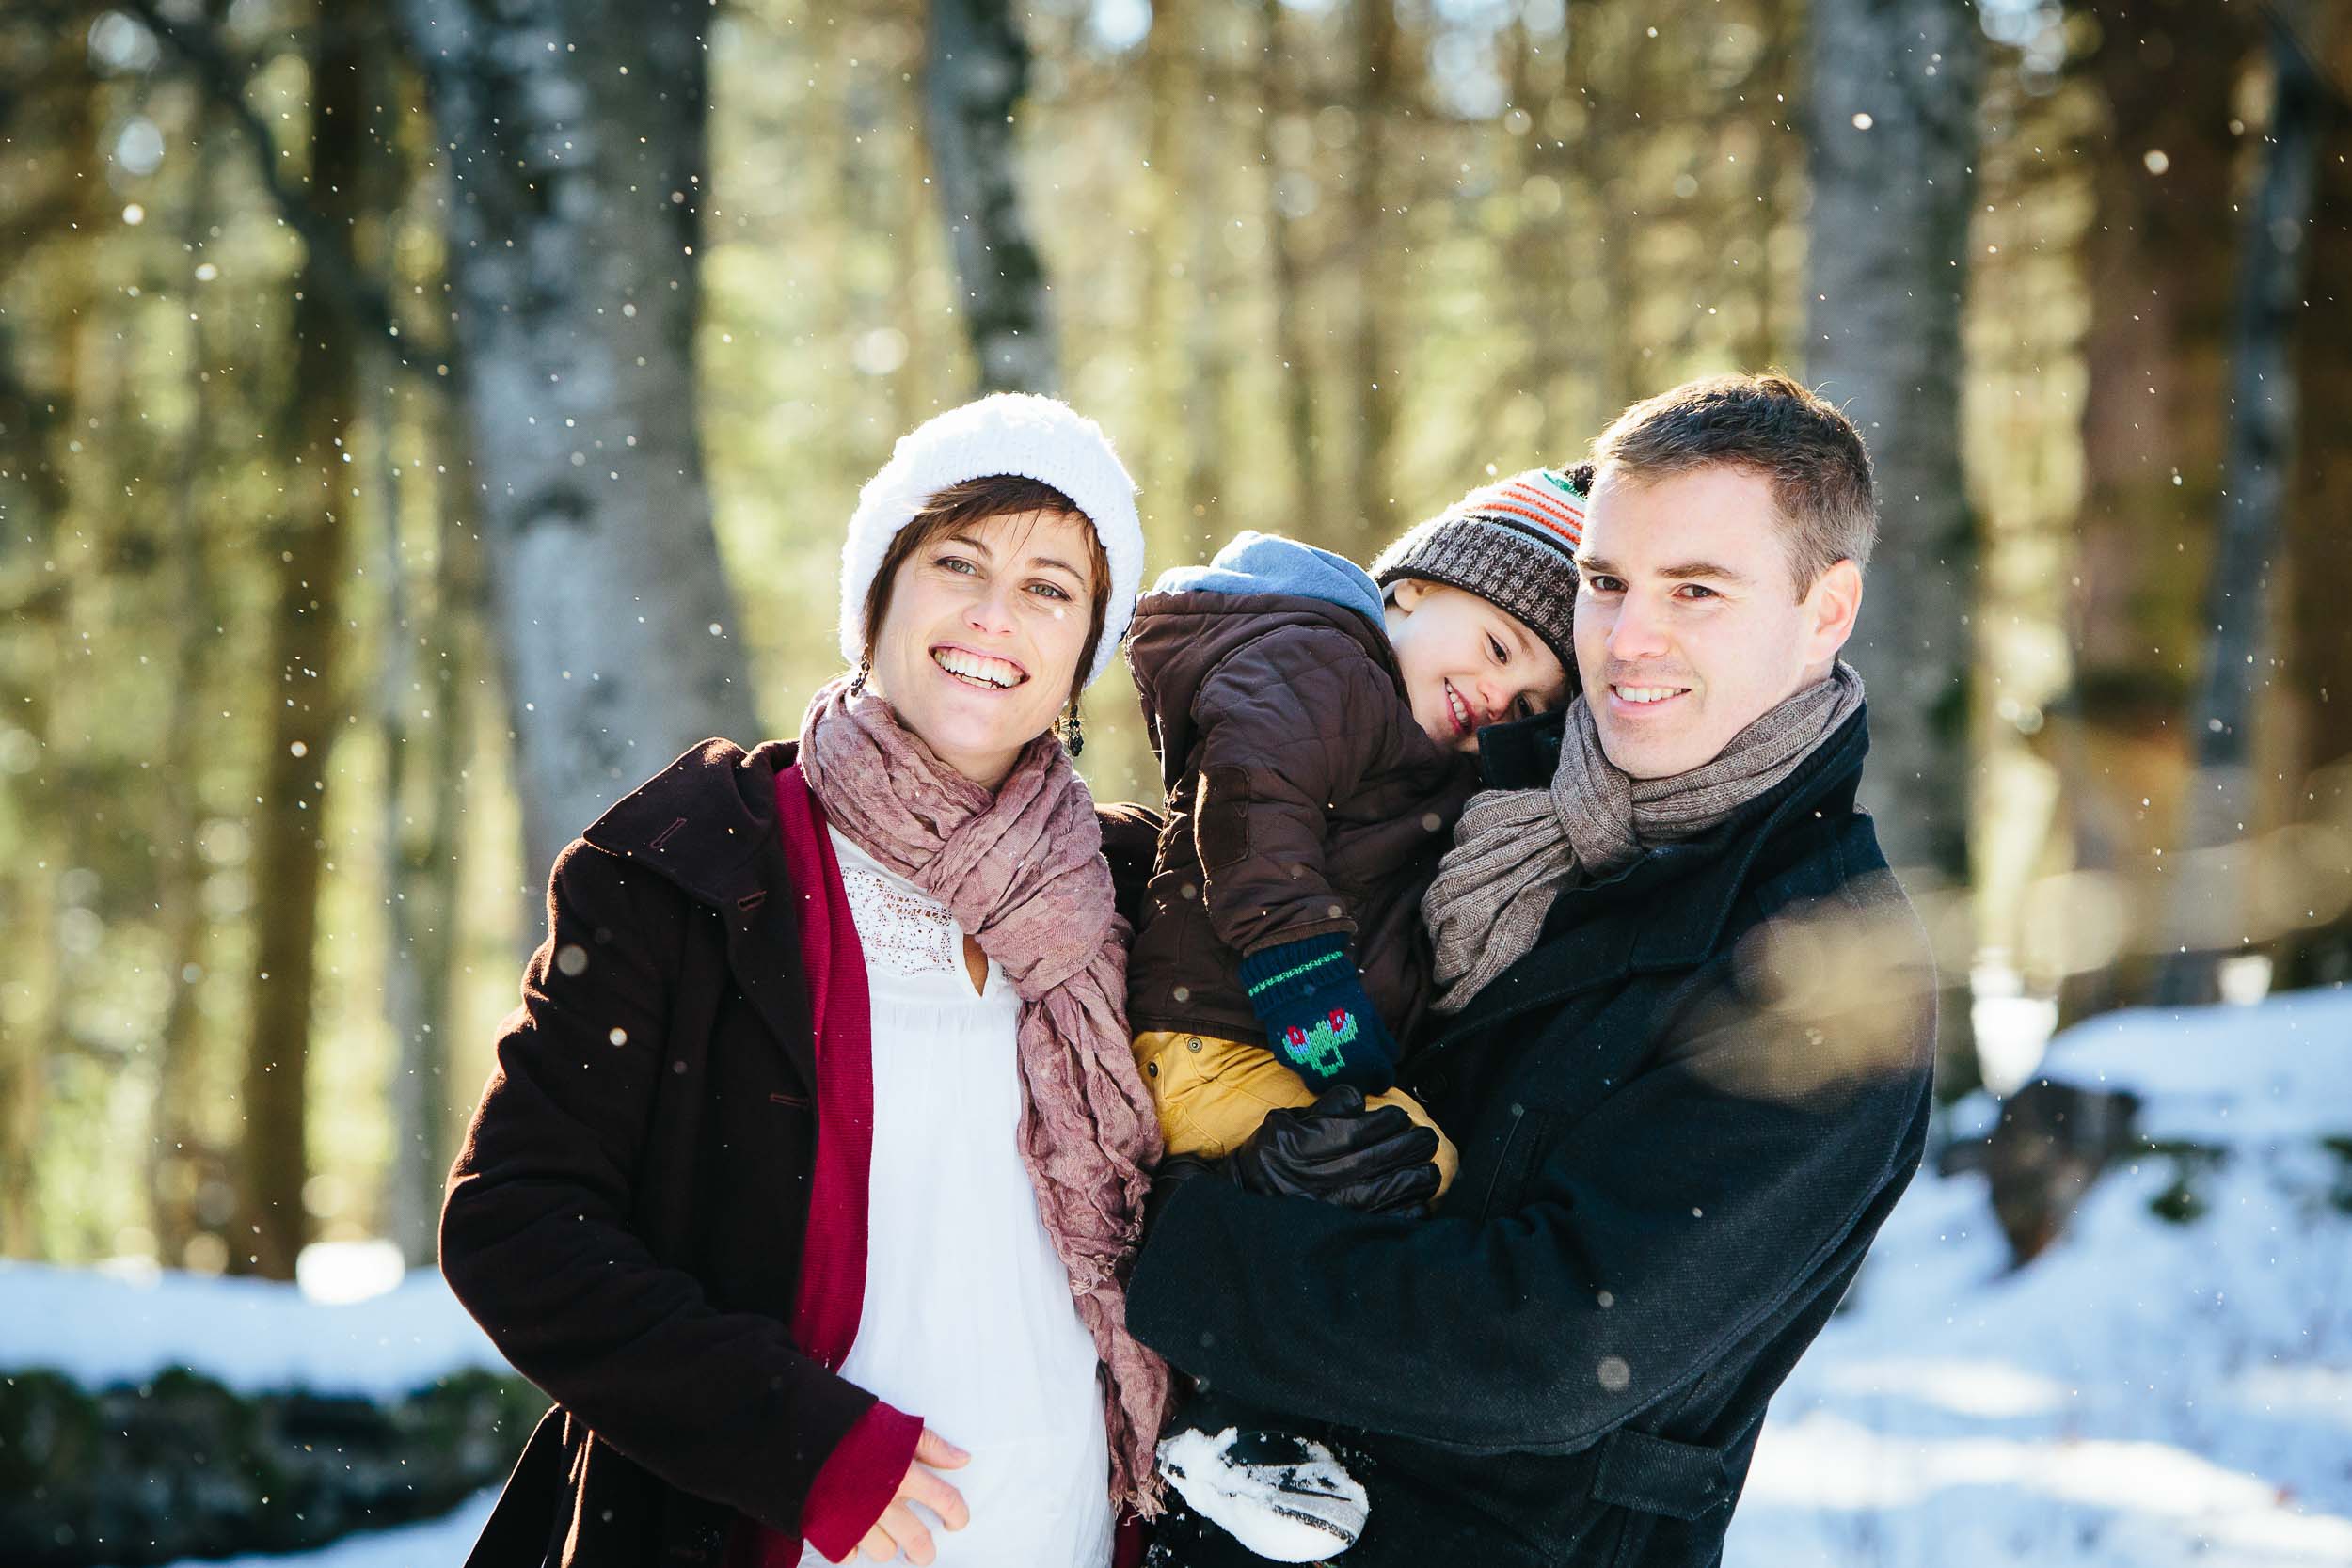 Get ready for your winter photo shoot | Tips for brides and mums